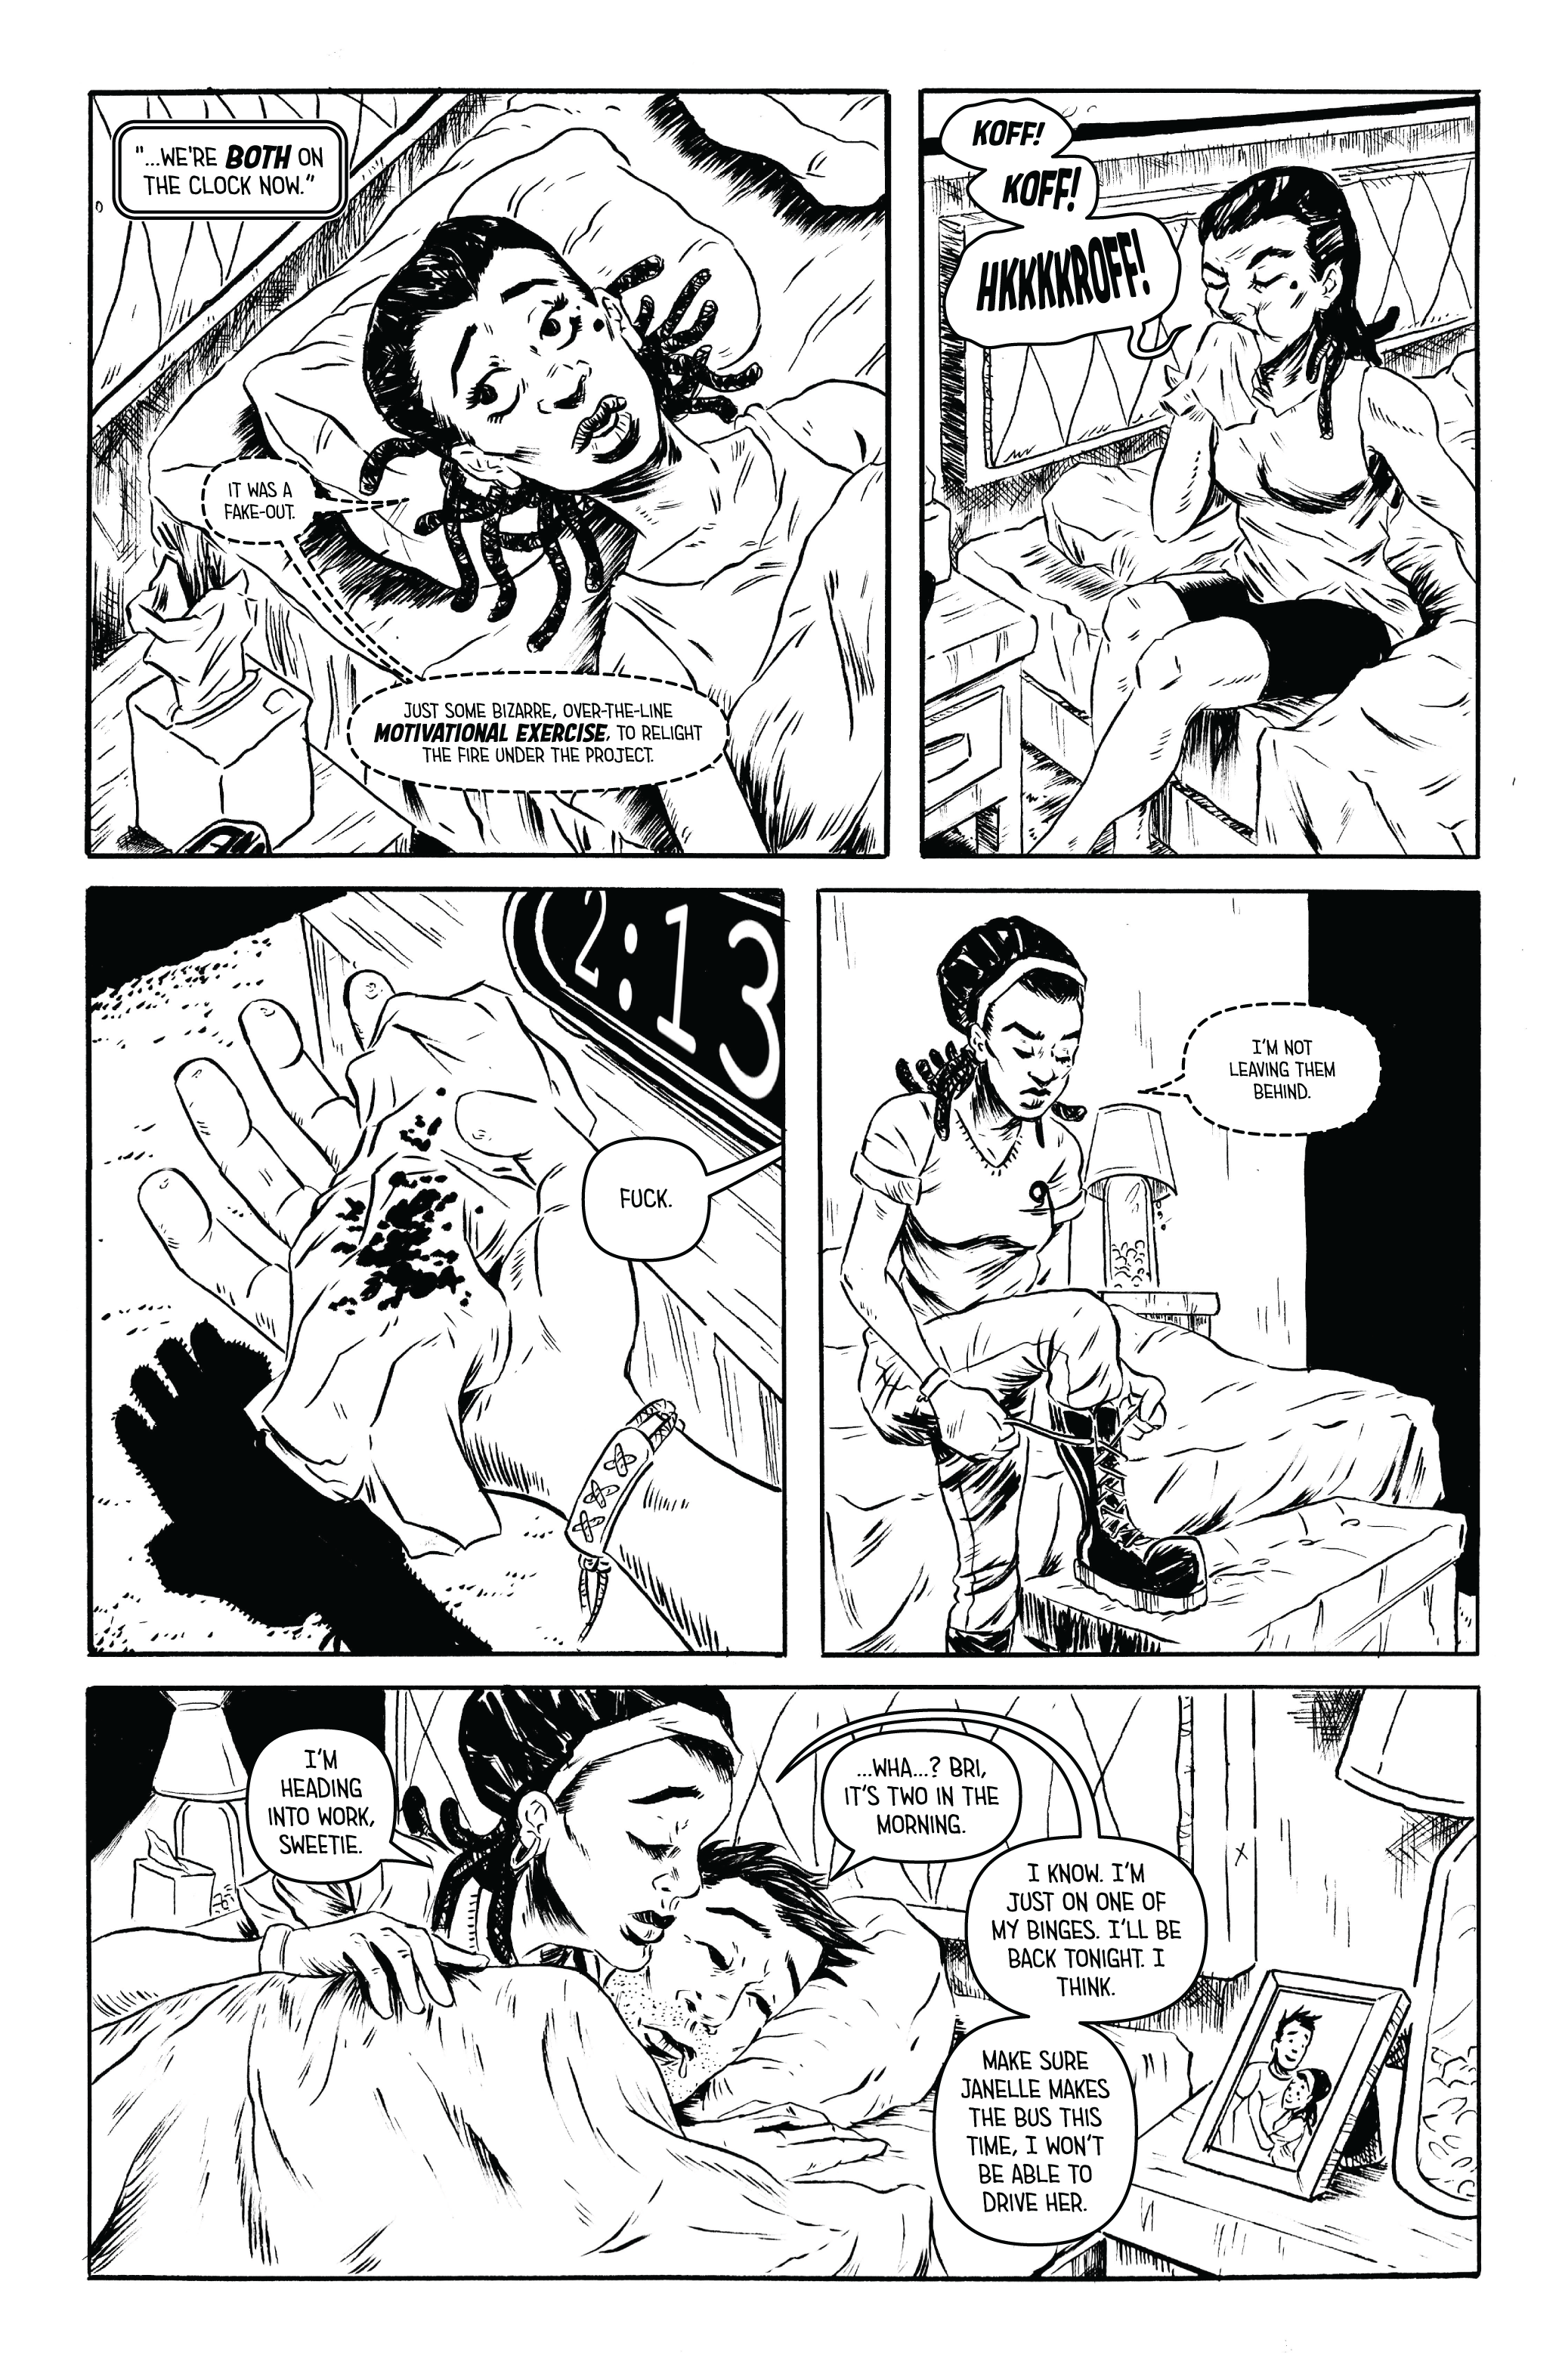 MONOCUL 03 pg 20 Incurable pg 03-01.png